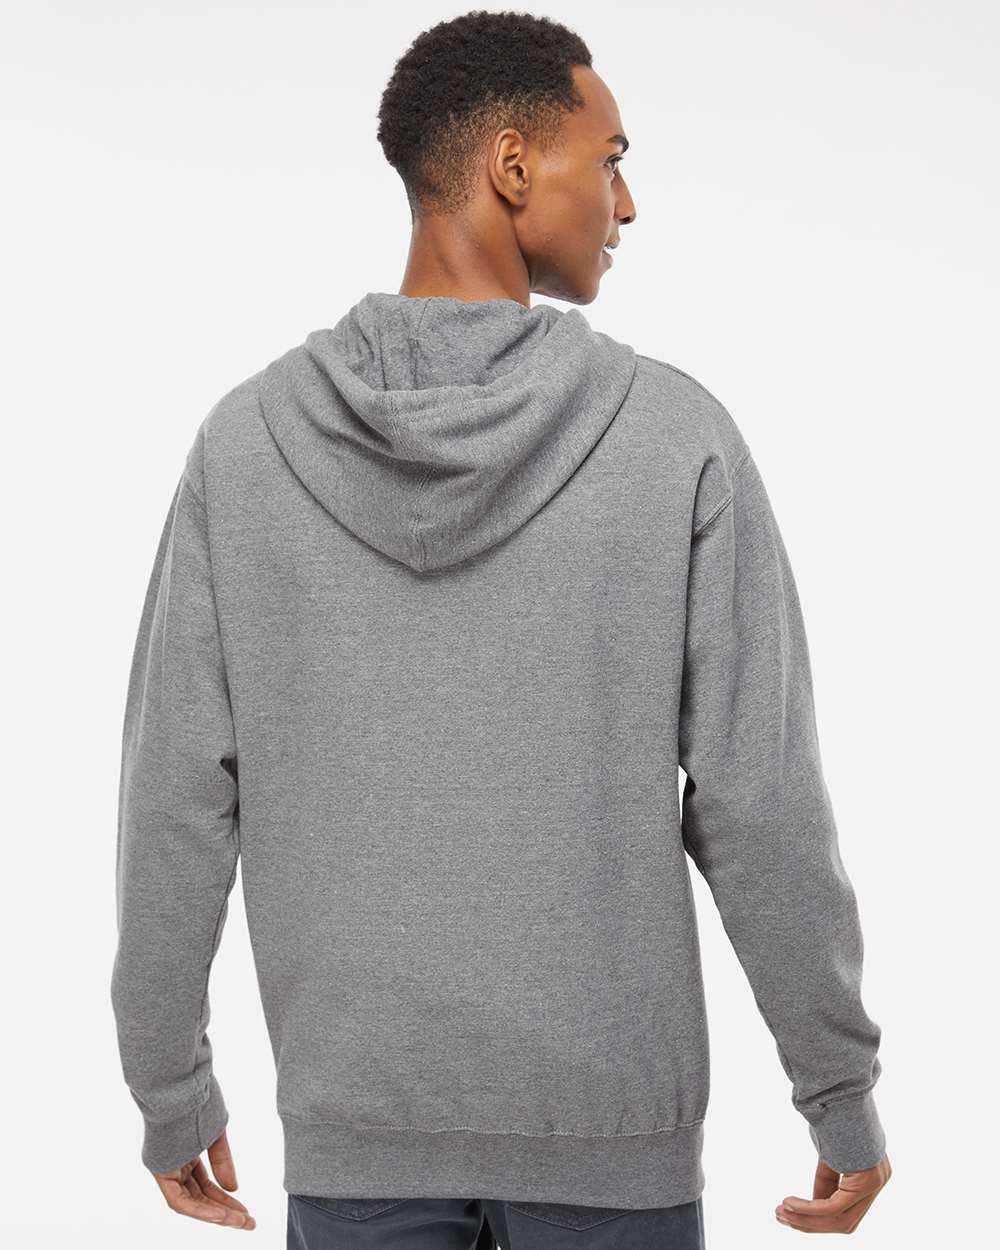 Independent Trading Co. Midweight Full-Zip Hooded Sweatshirt SS4500Z #colormdl_Gunmetal Heather